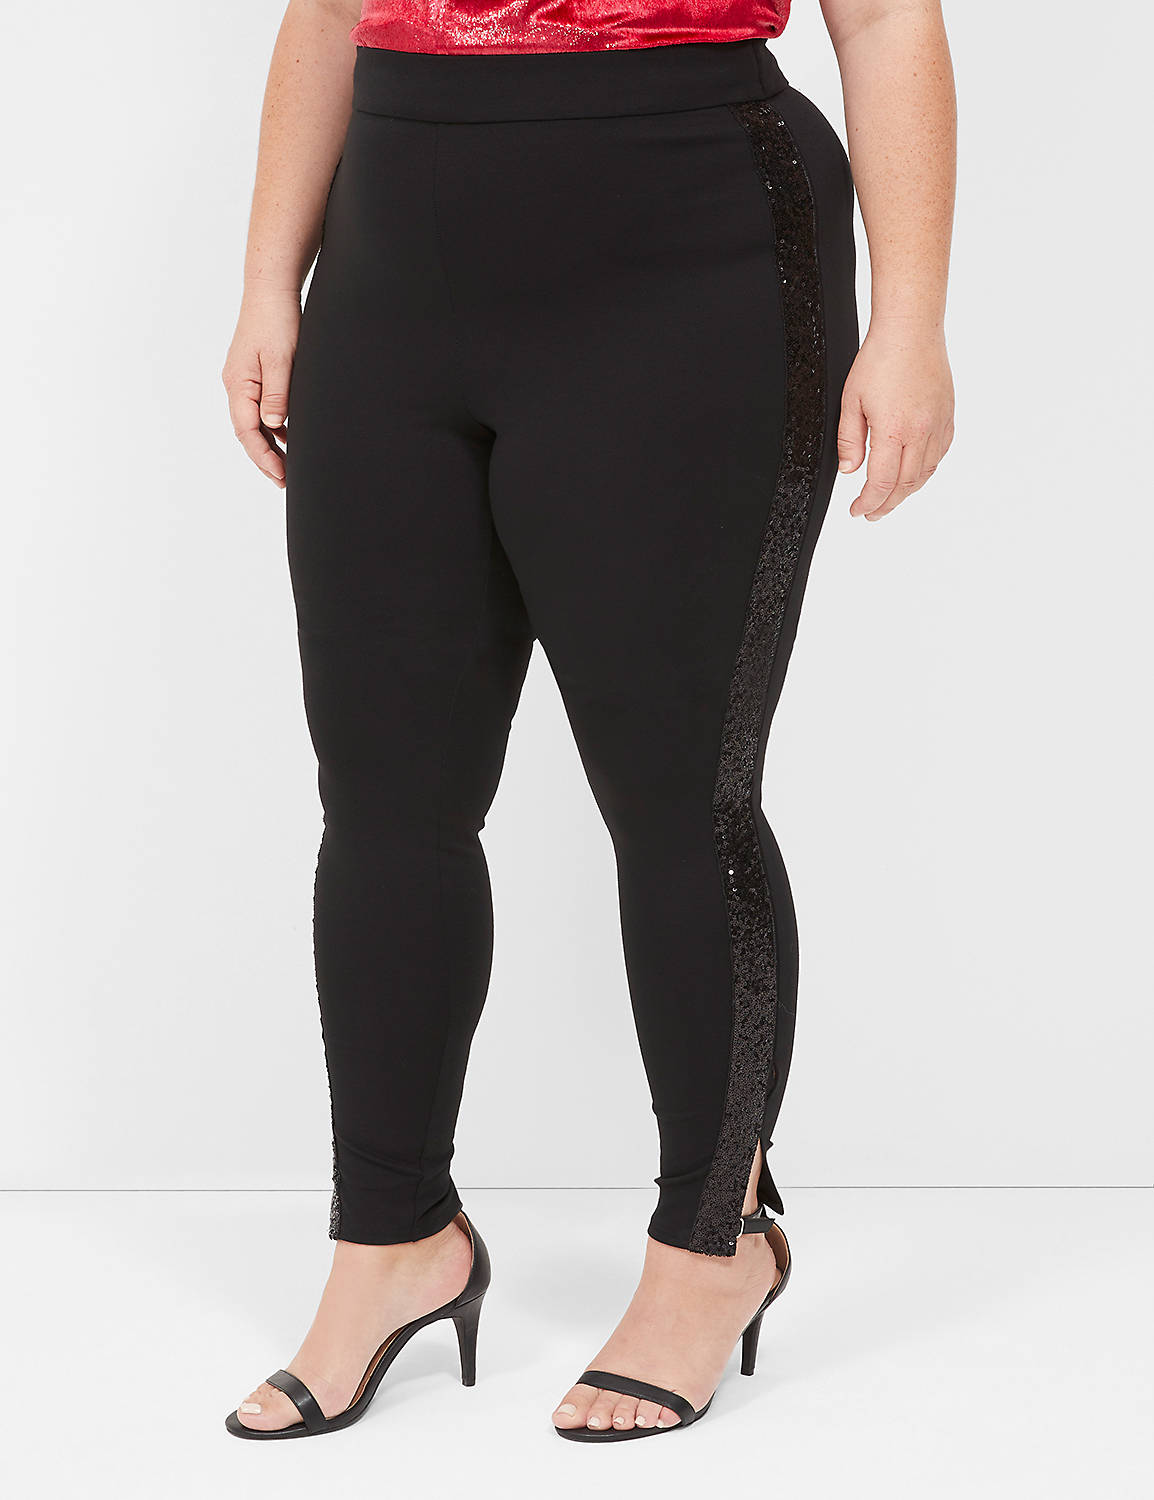 Ponte Leggings – Structured Ponte Knit Leggings That Hold You In